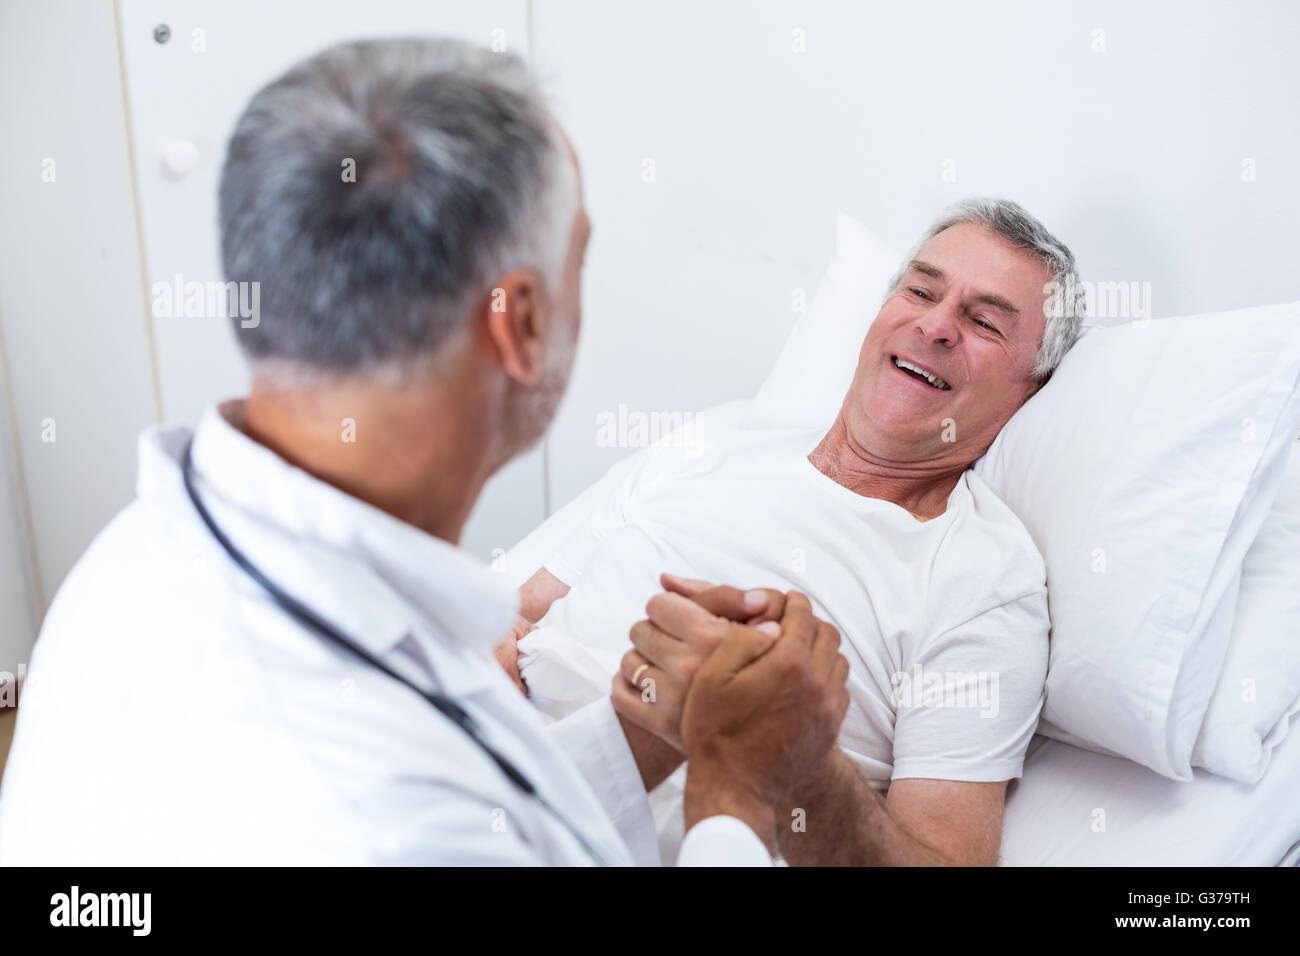 Male doctor consoling senior man Stock Photo